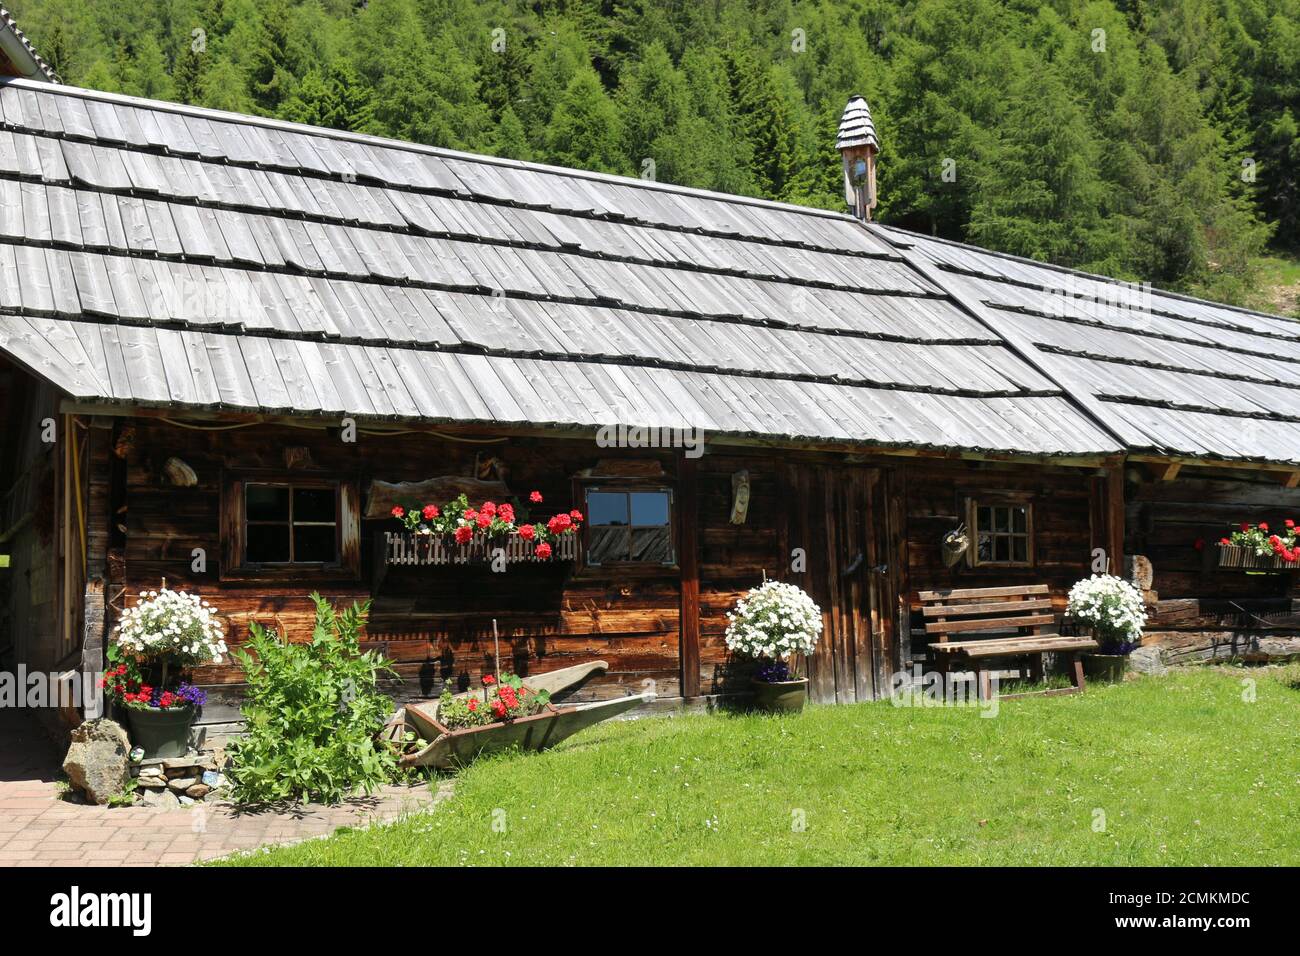 Old wooden barn with shingle roof in the mountains. On Sommeregger Alm, height 1720 m, above the Millstatt lake. Stock Photo